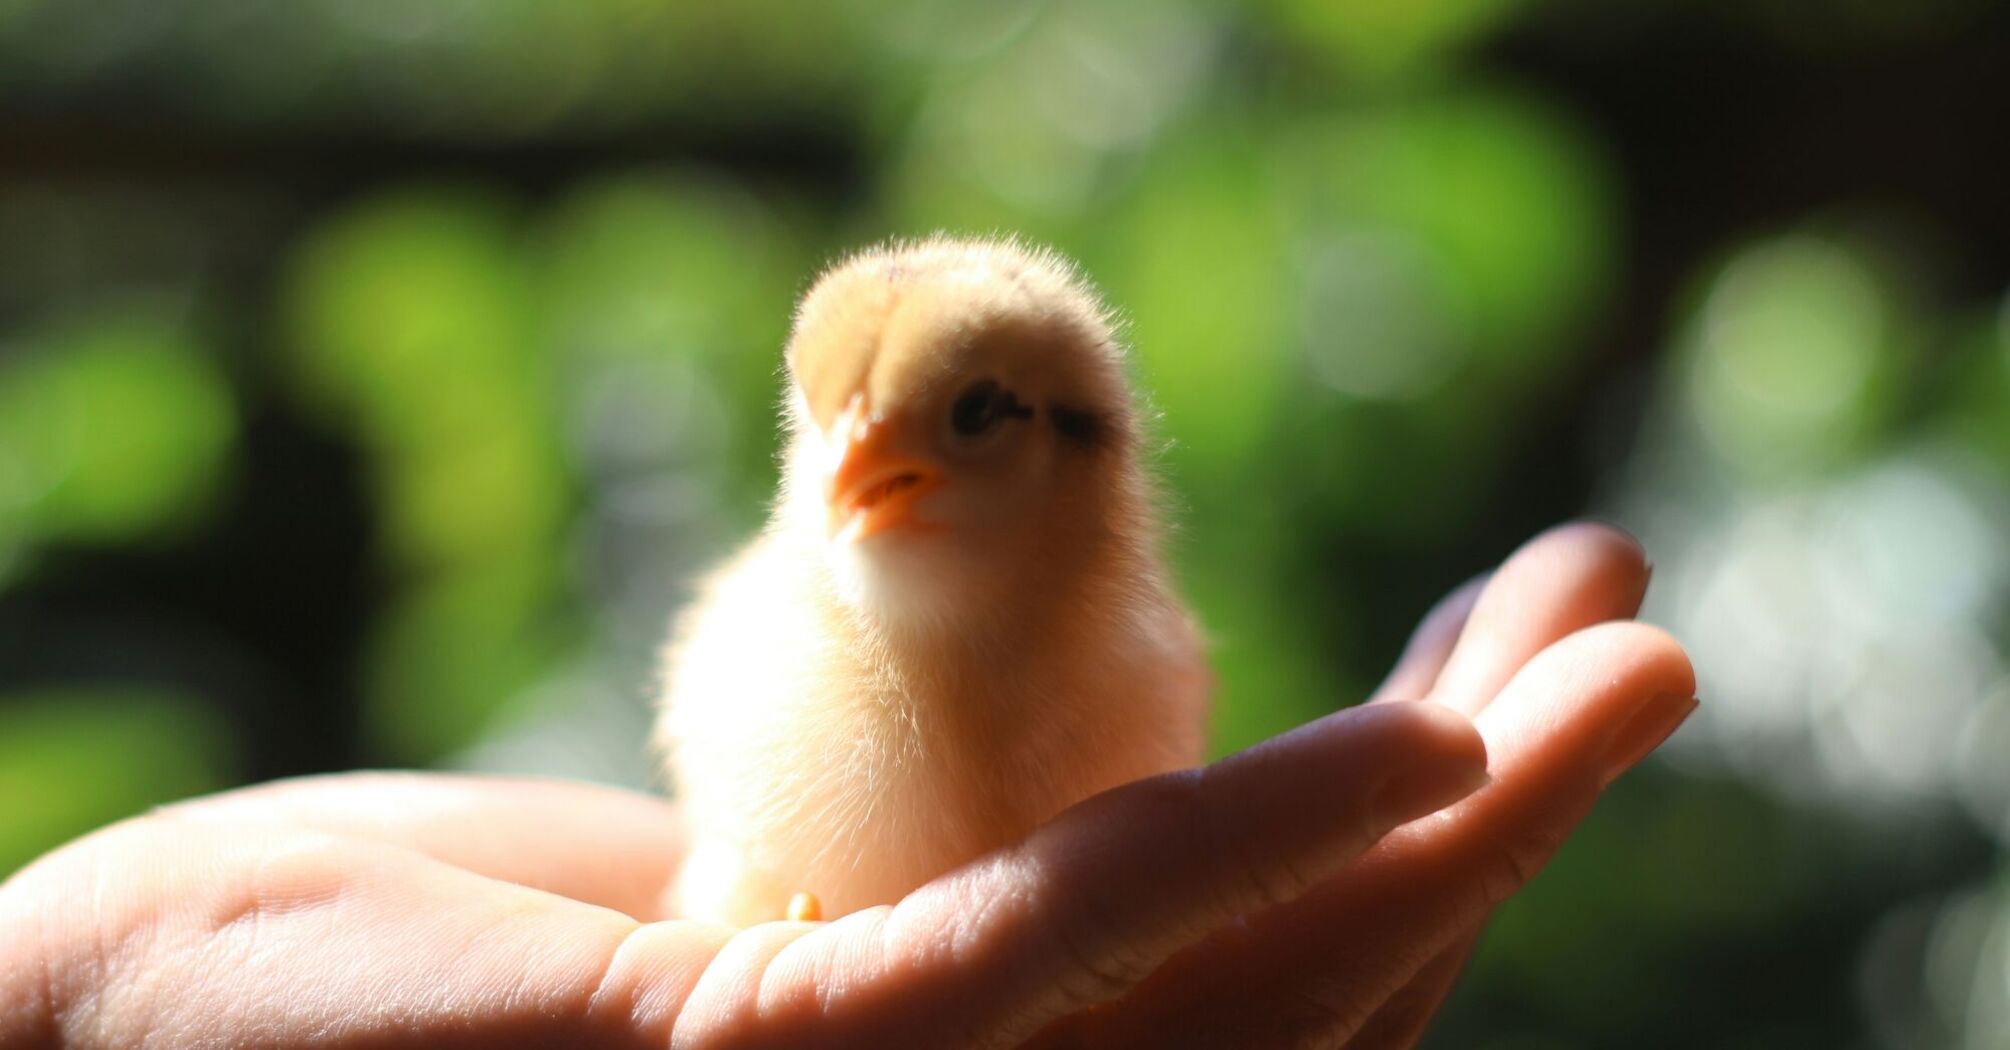 A small, fluffy yellow chick on a person's open palm against a blurred green background